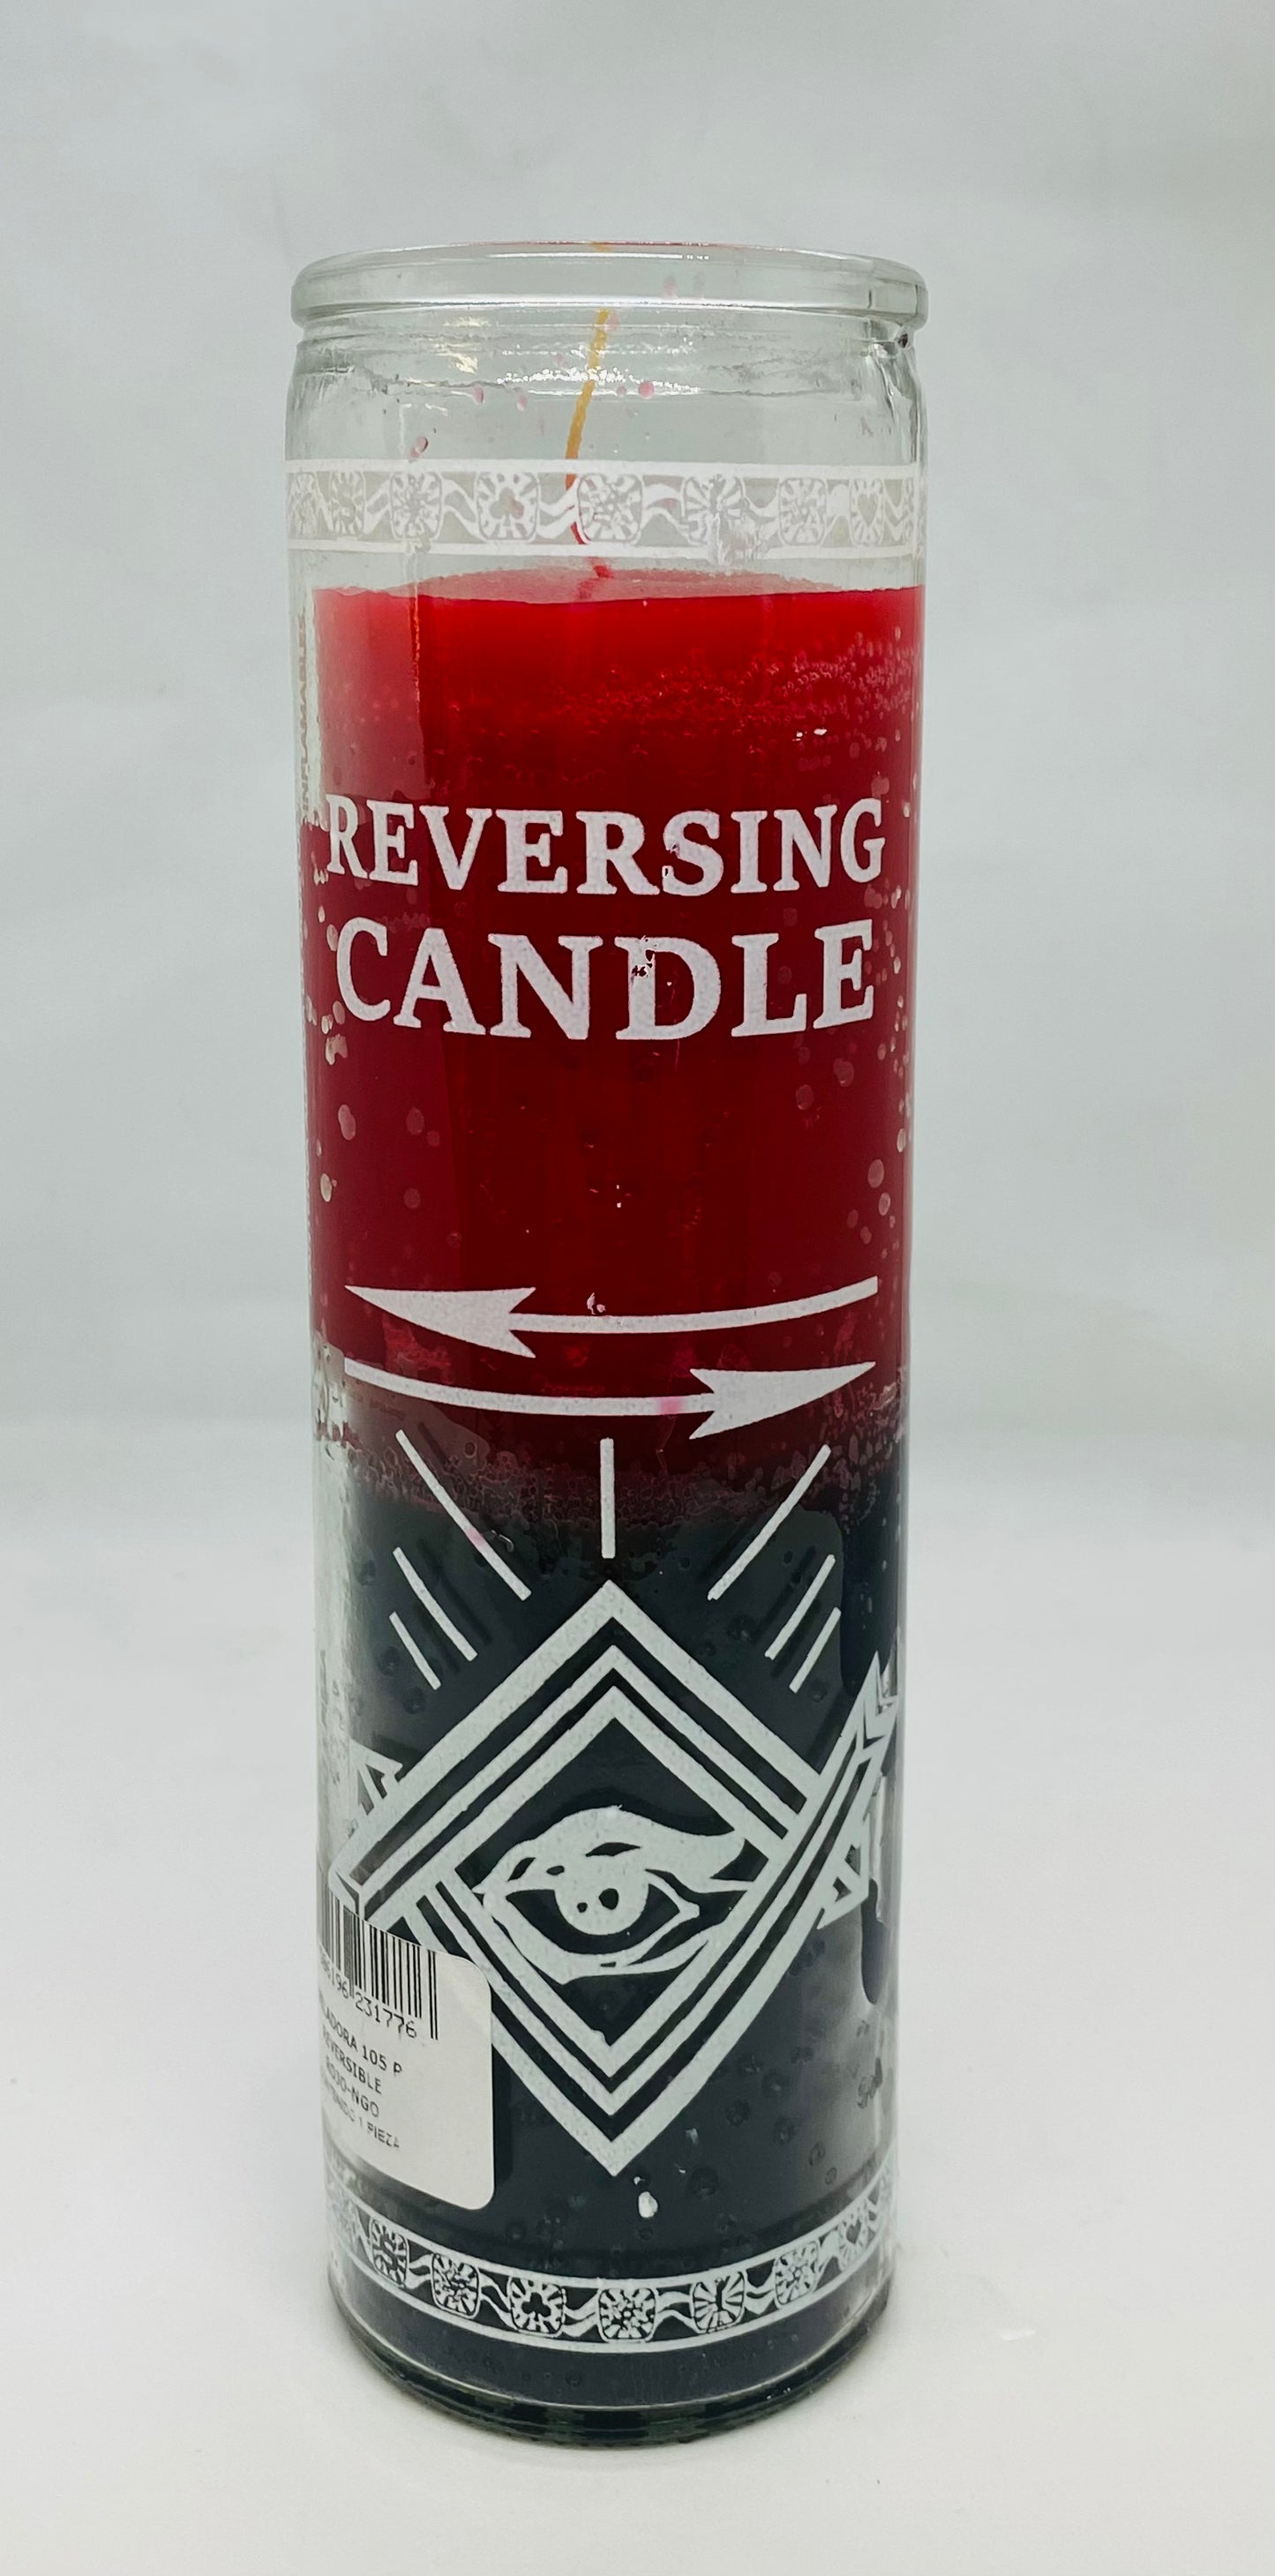 Double Action Reversible Candle